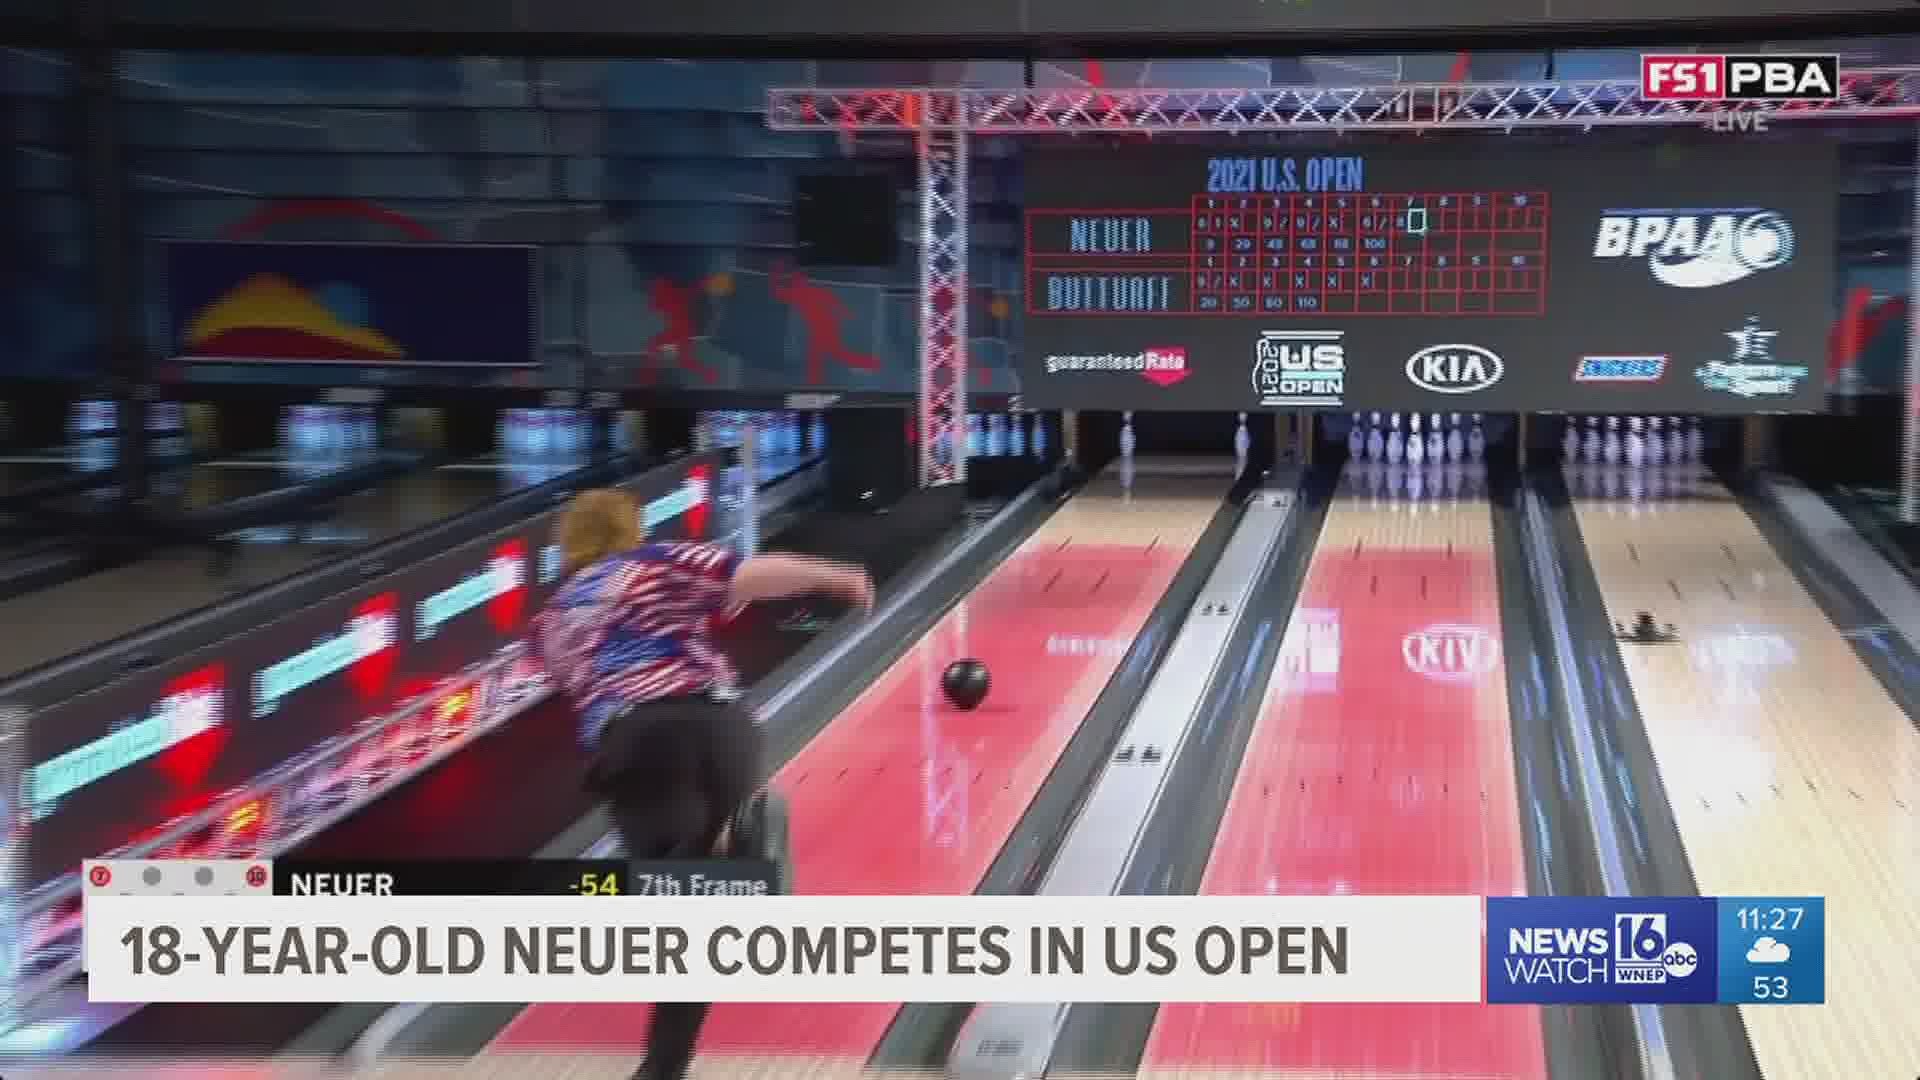 For the first time in 30 years on national television, a bowler from Lewisburg converted seven-ten split during the PBA U.S. Open.